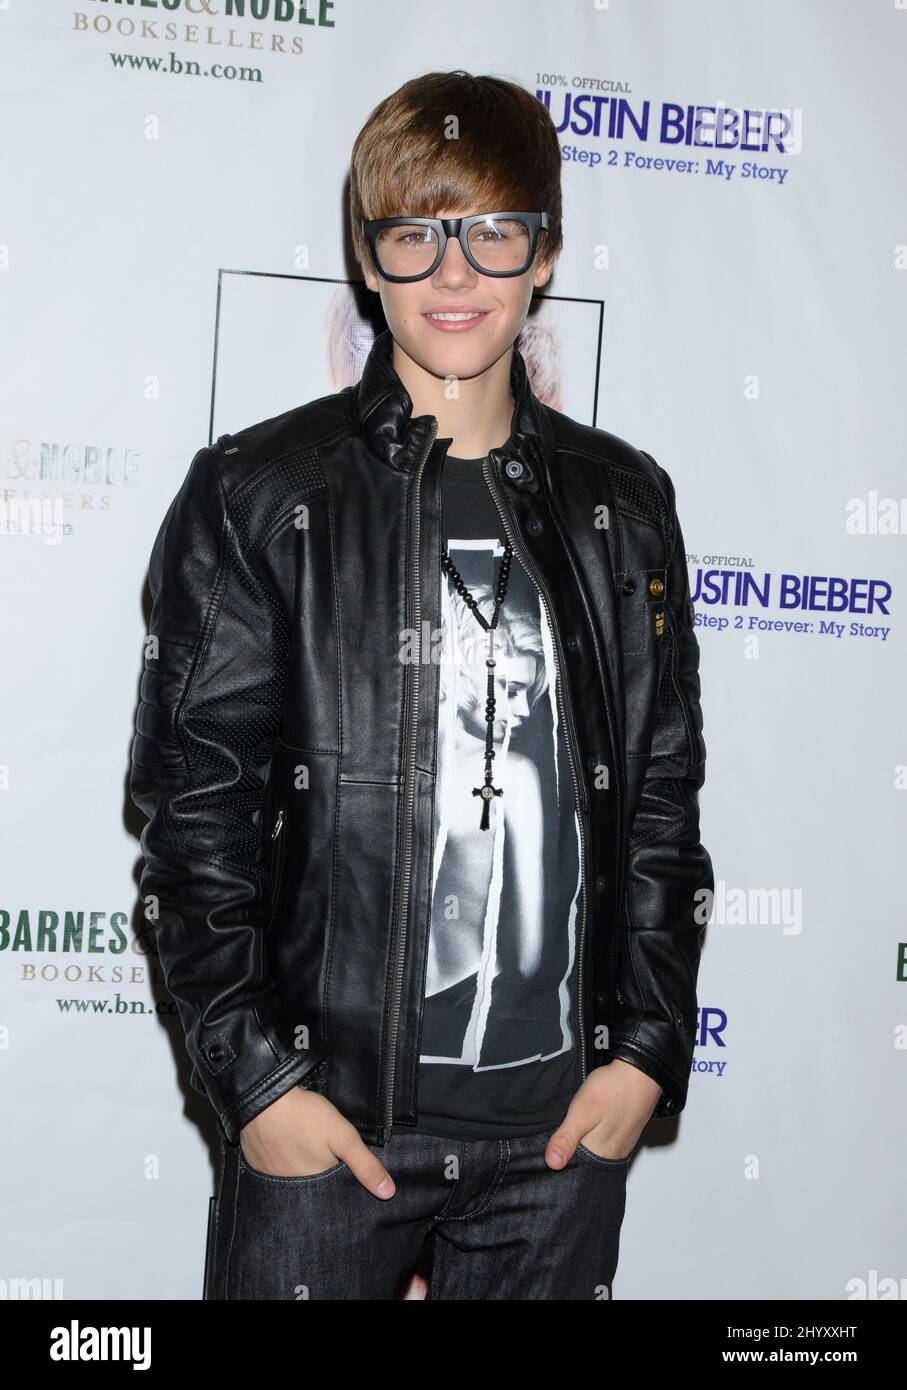 „Justin Bieber First Step 2 Forever: My Story“, Buchunterschrift bei Barnes and Noble at the Grove, Los Angeles. Stockfoto